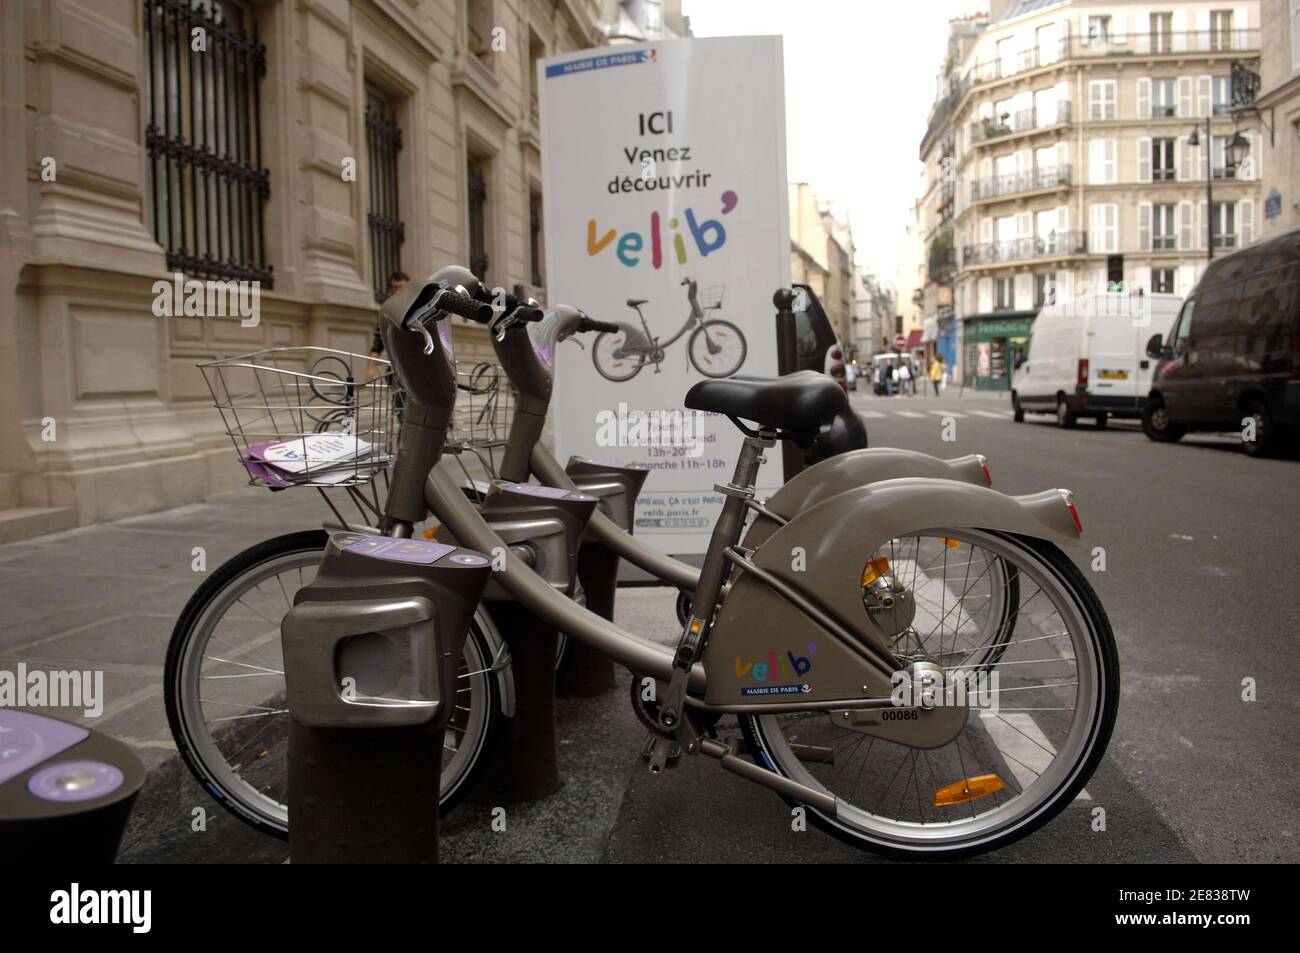 On July 15, 2007, the city of Paris will debut a new self-service bicycle  transit system called Velib'. Parisians and visitors alike will be able to  pick up and drop off bicycles